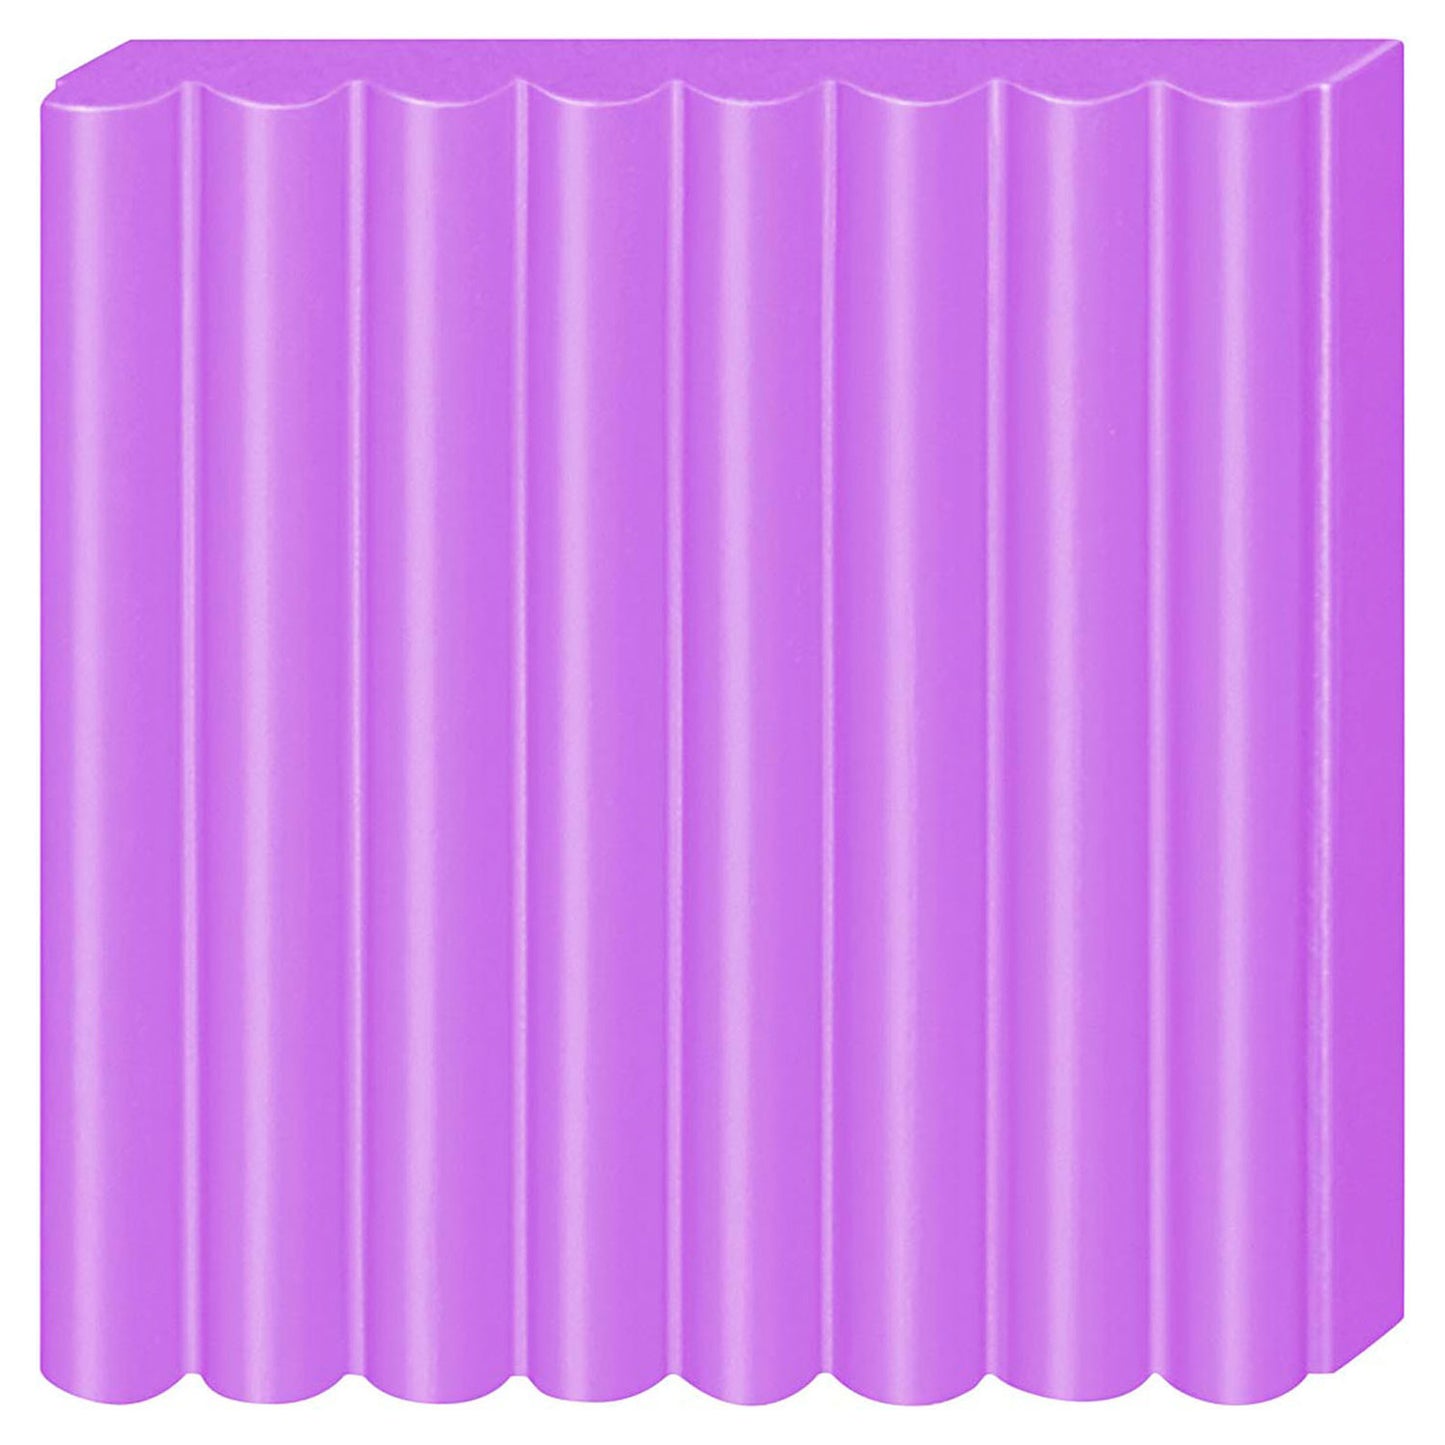 FIMO Effect Monting Clay Clay Neon Purple, 57gr